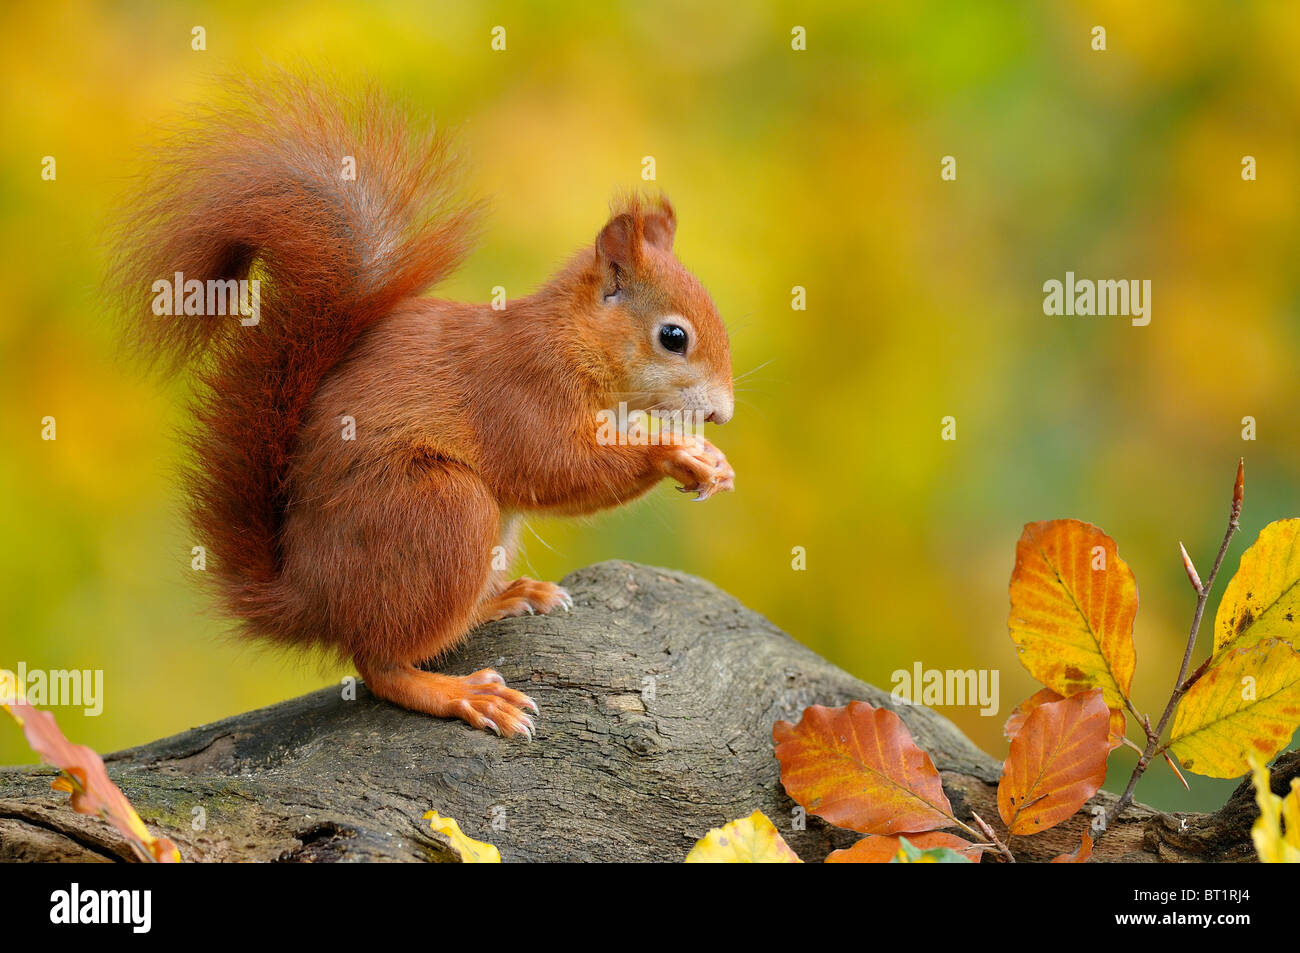 Red Squirrel (Sciurus vulgaris) eating while standing on a tree stump, Netherlands. Stock Photo